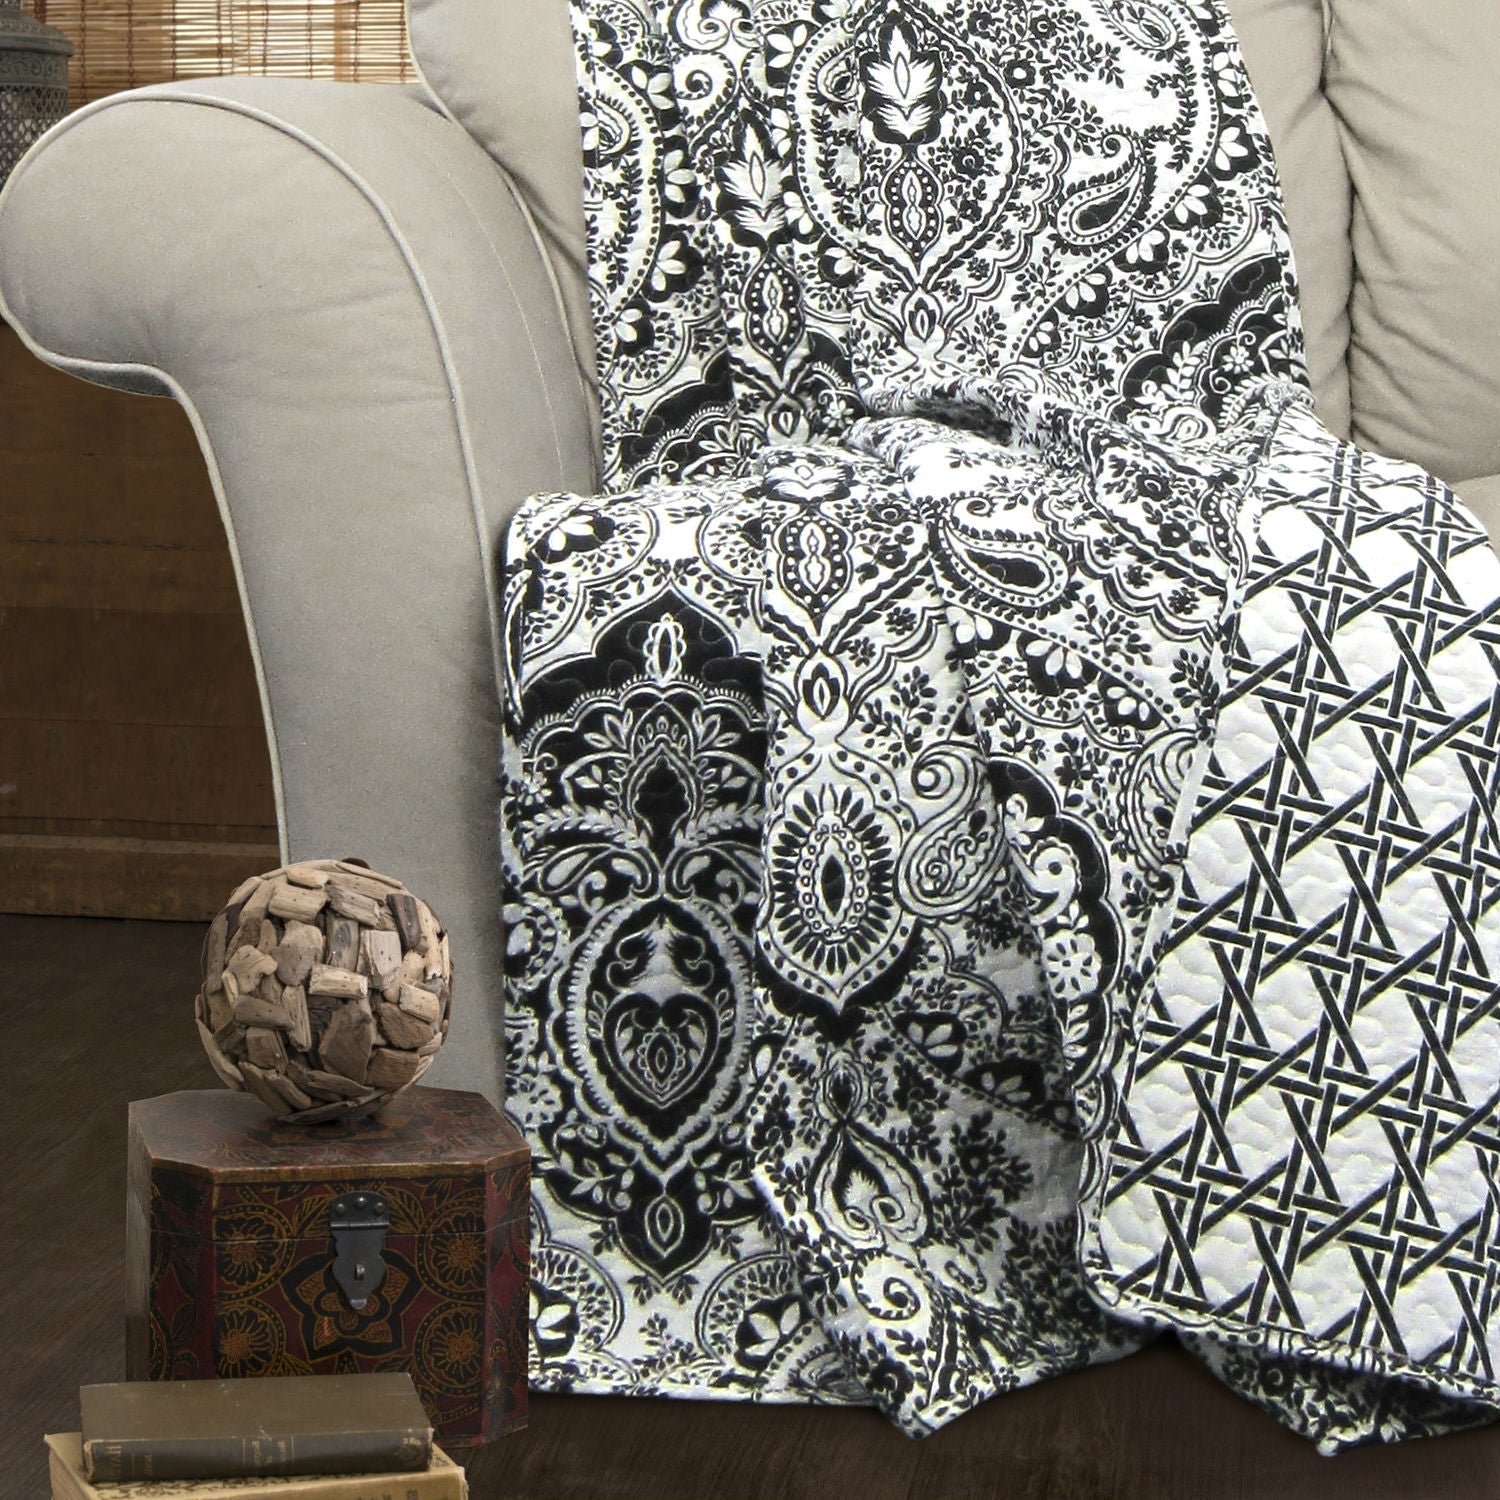 Bedroom > Quilts & Blankets - Queen Size 3-Piece Quilt Set 100-Percent Cotton In Black White Damask